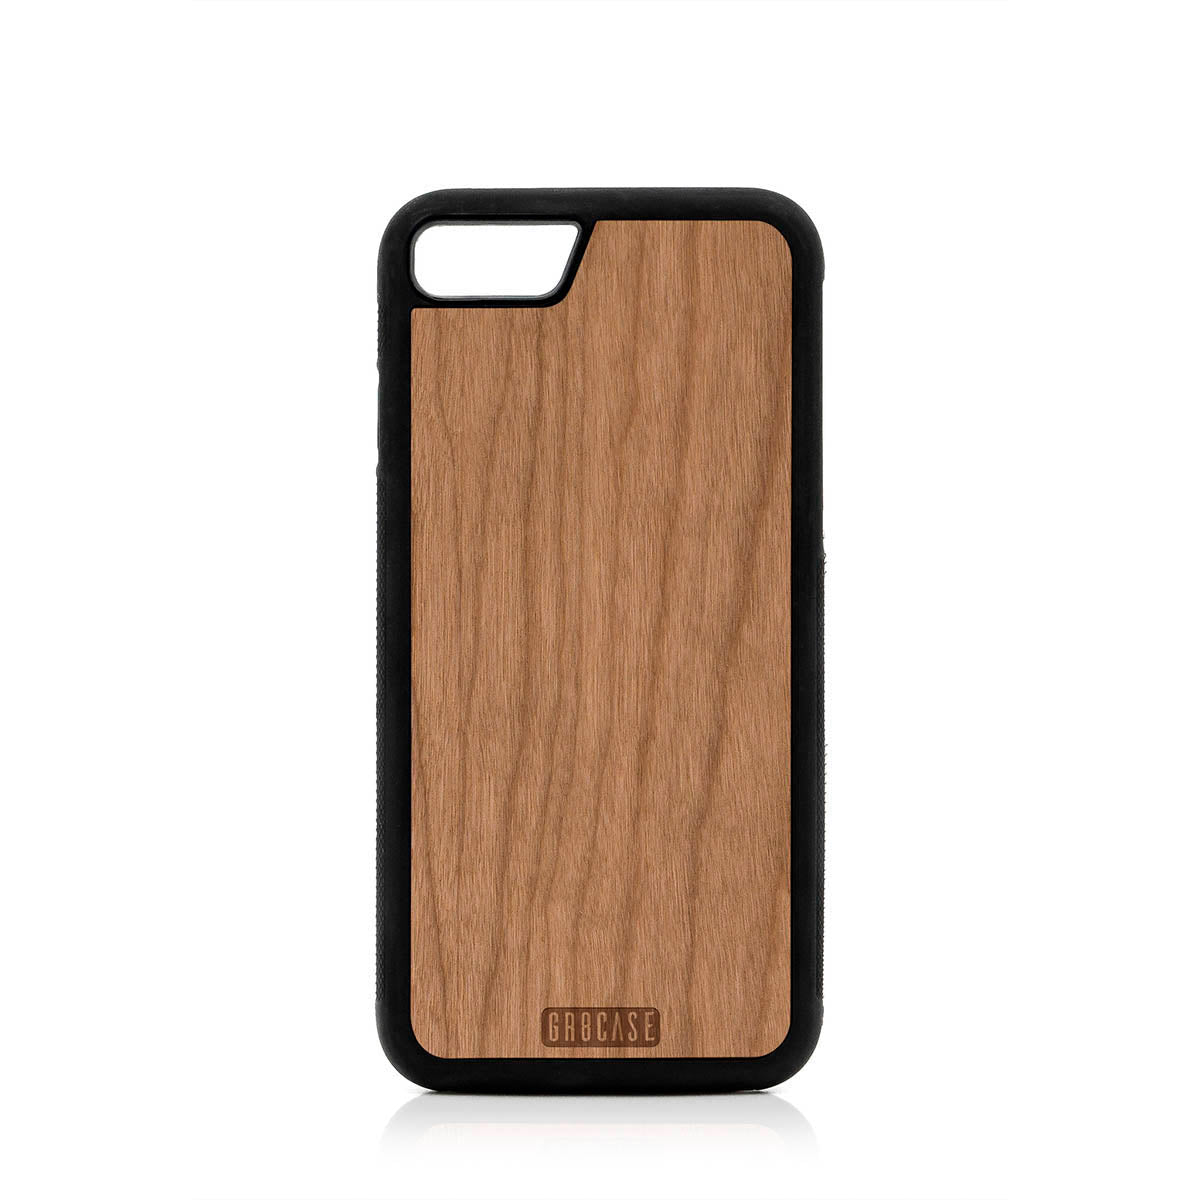 Classic Solid Wood Panel Inlay Case For iPhone 7/8 by GR8CASE